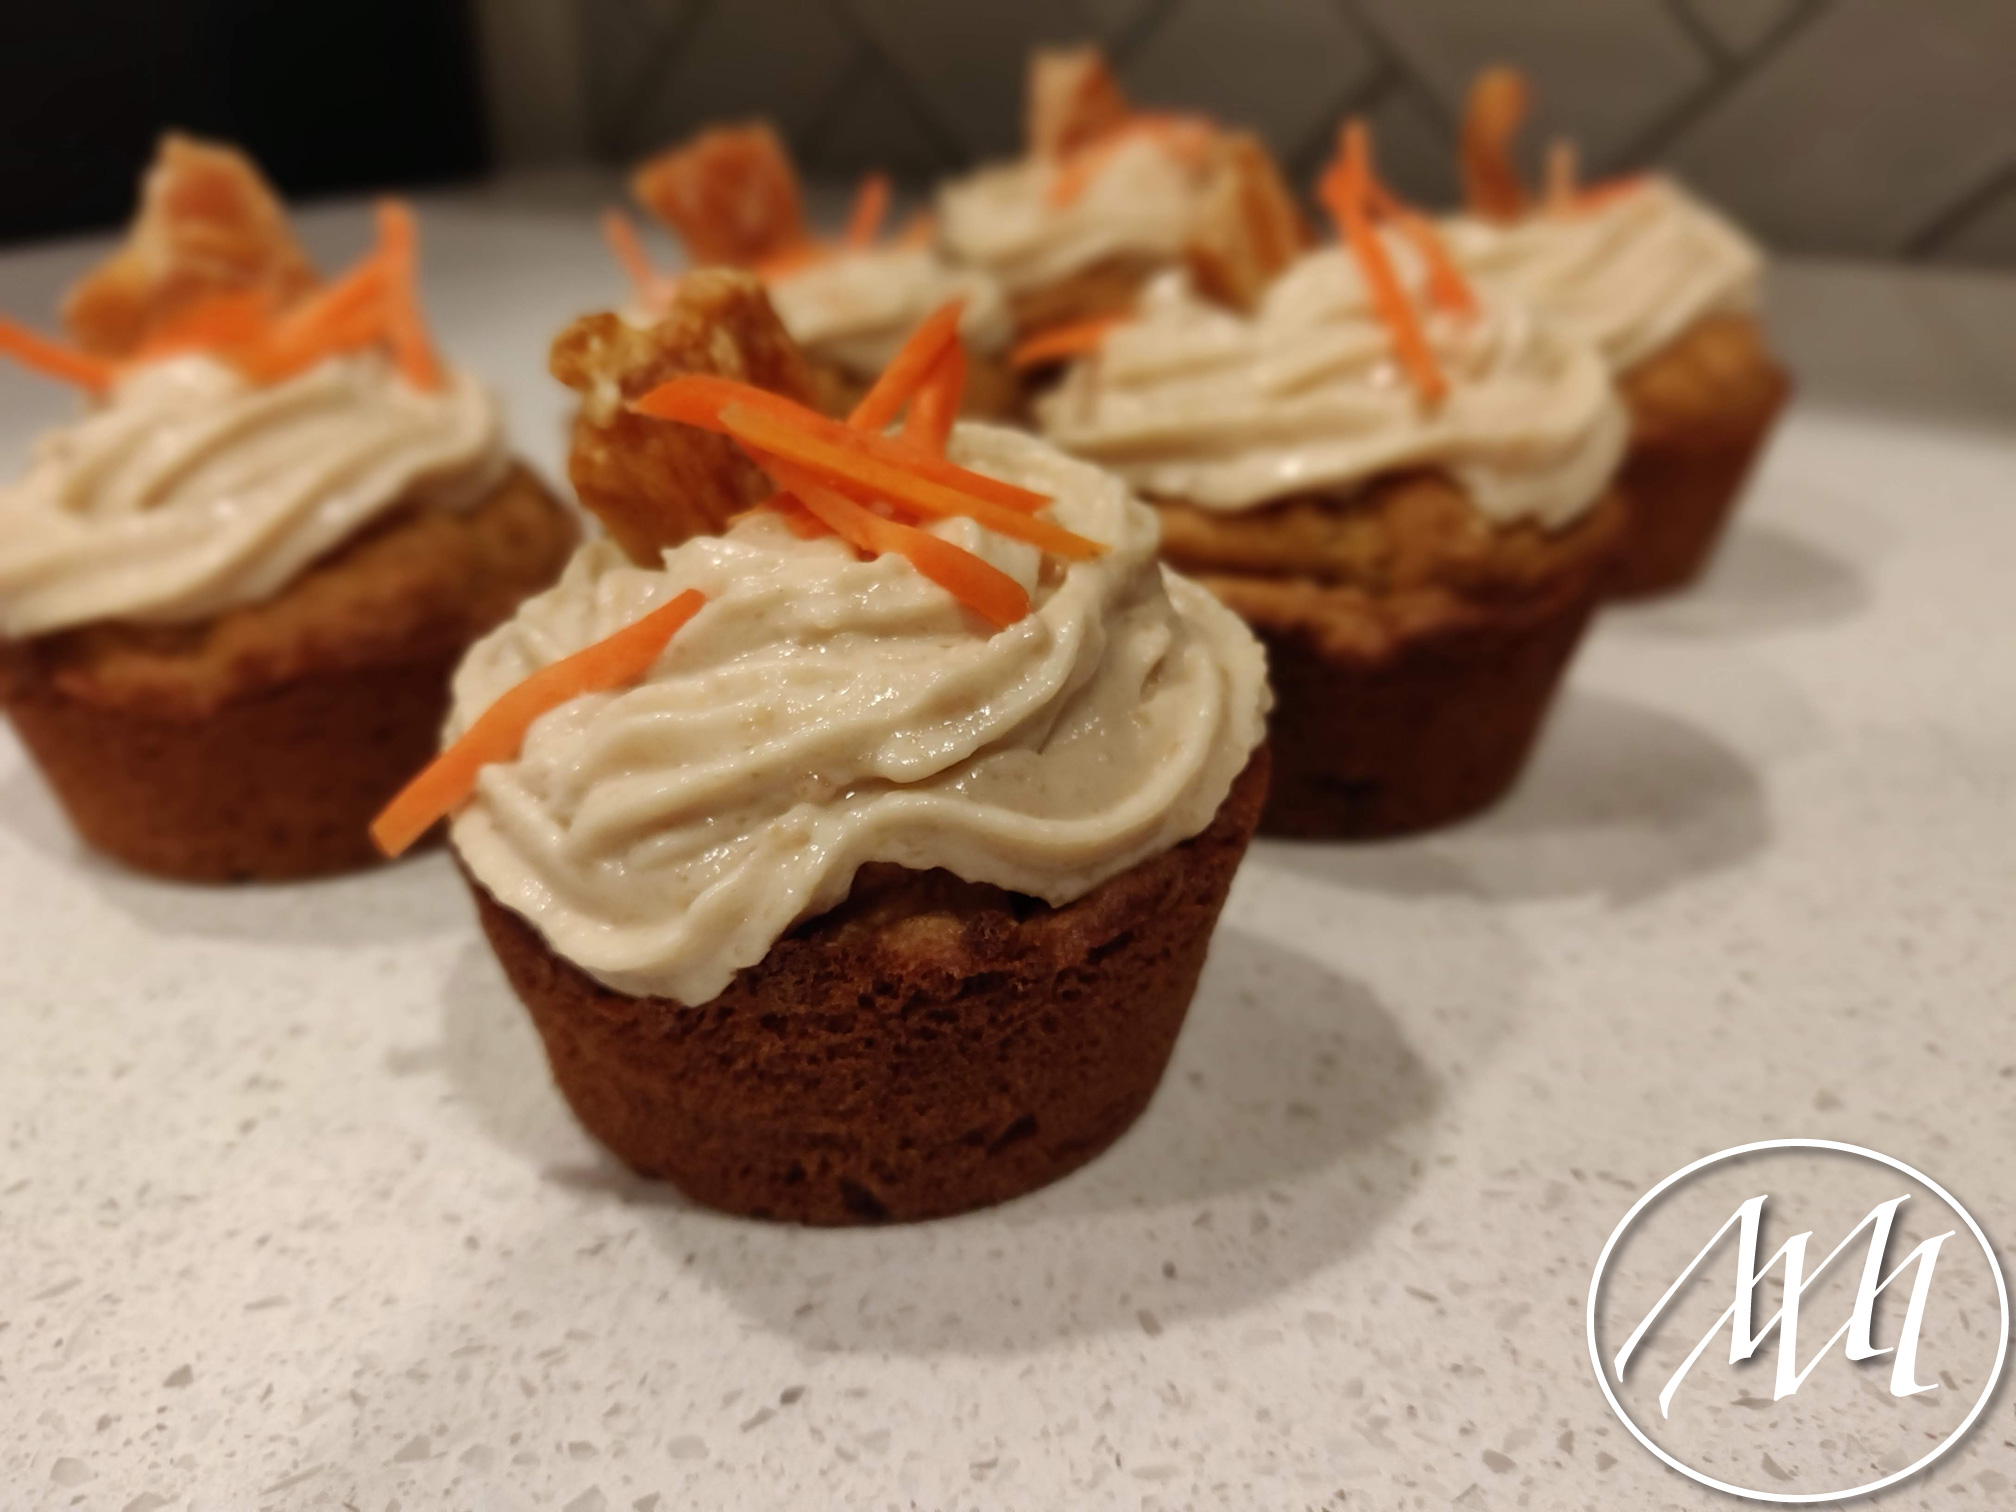 Carrot and Peanut Butter Pupcake